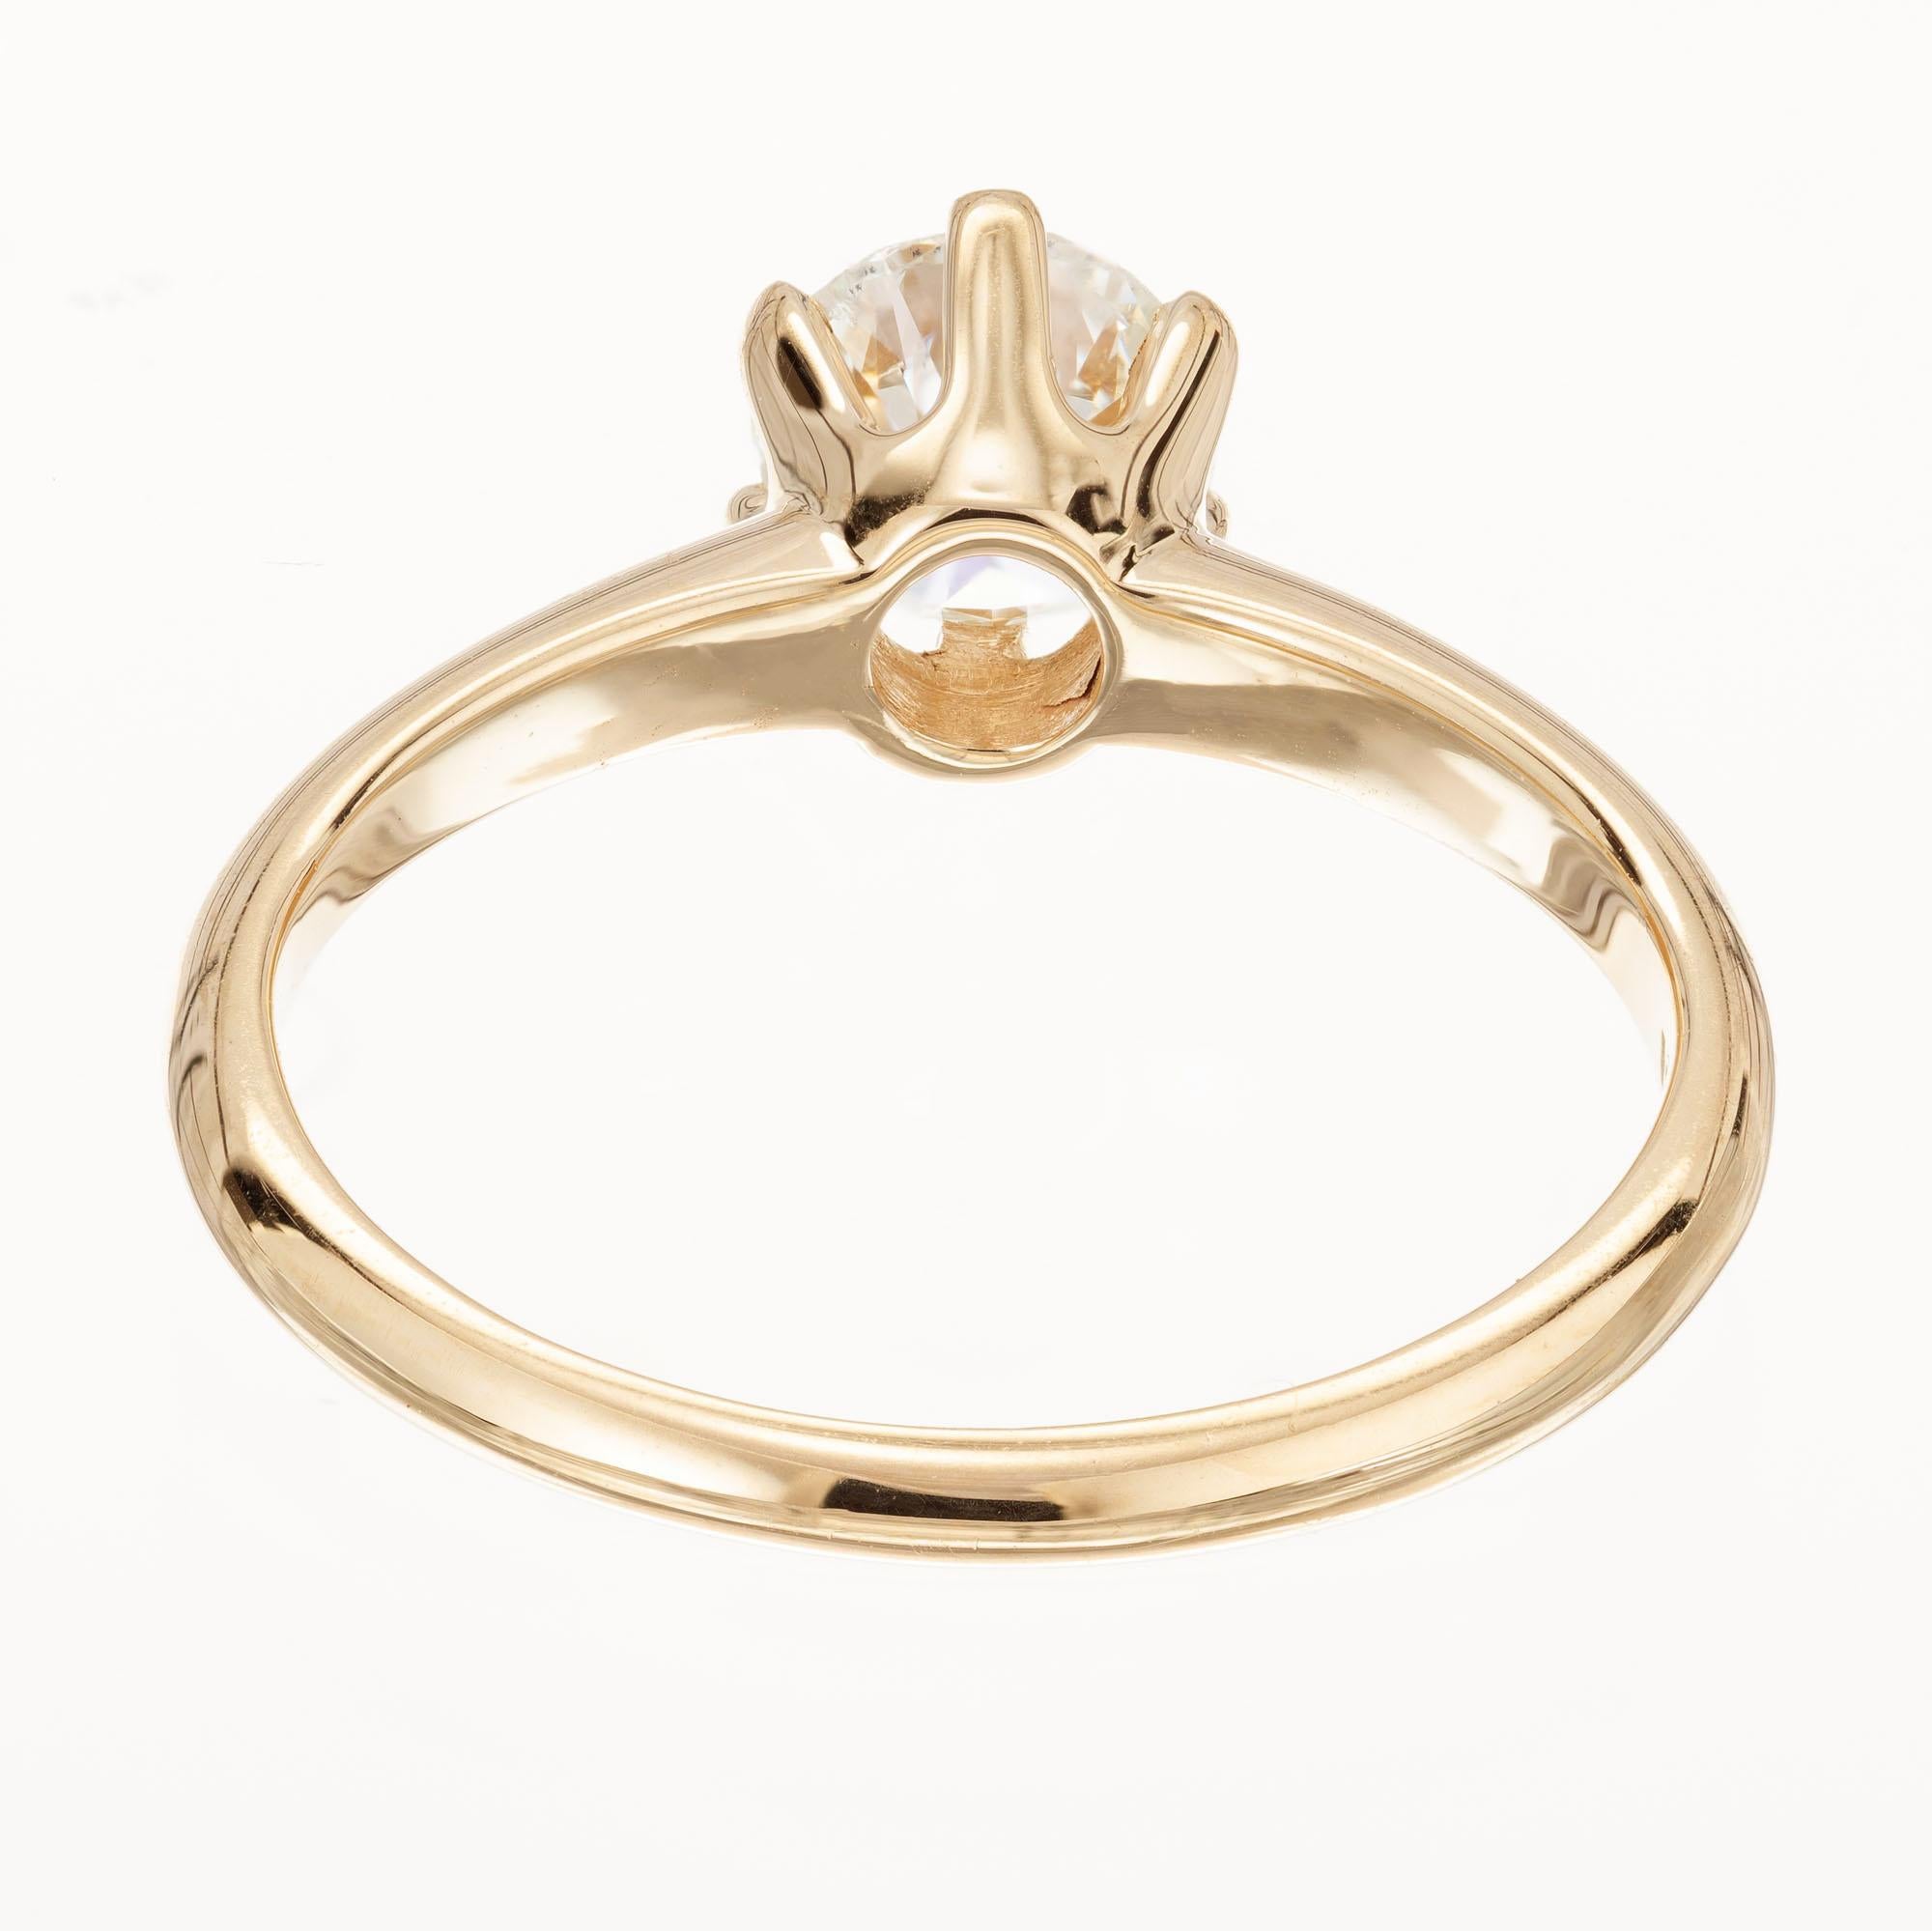 1 ct yellow gold solitaire engagement ring